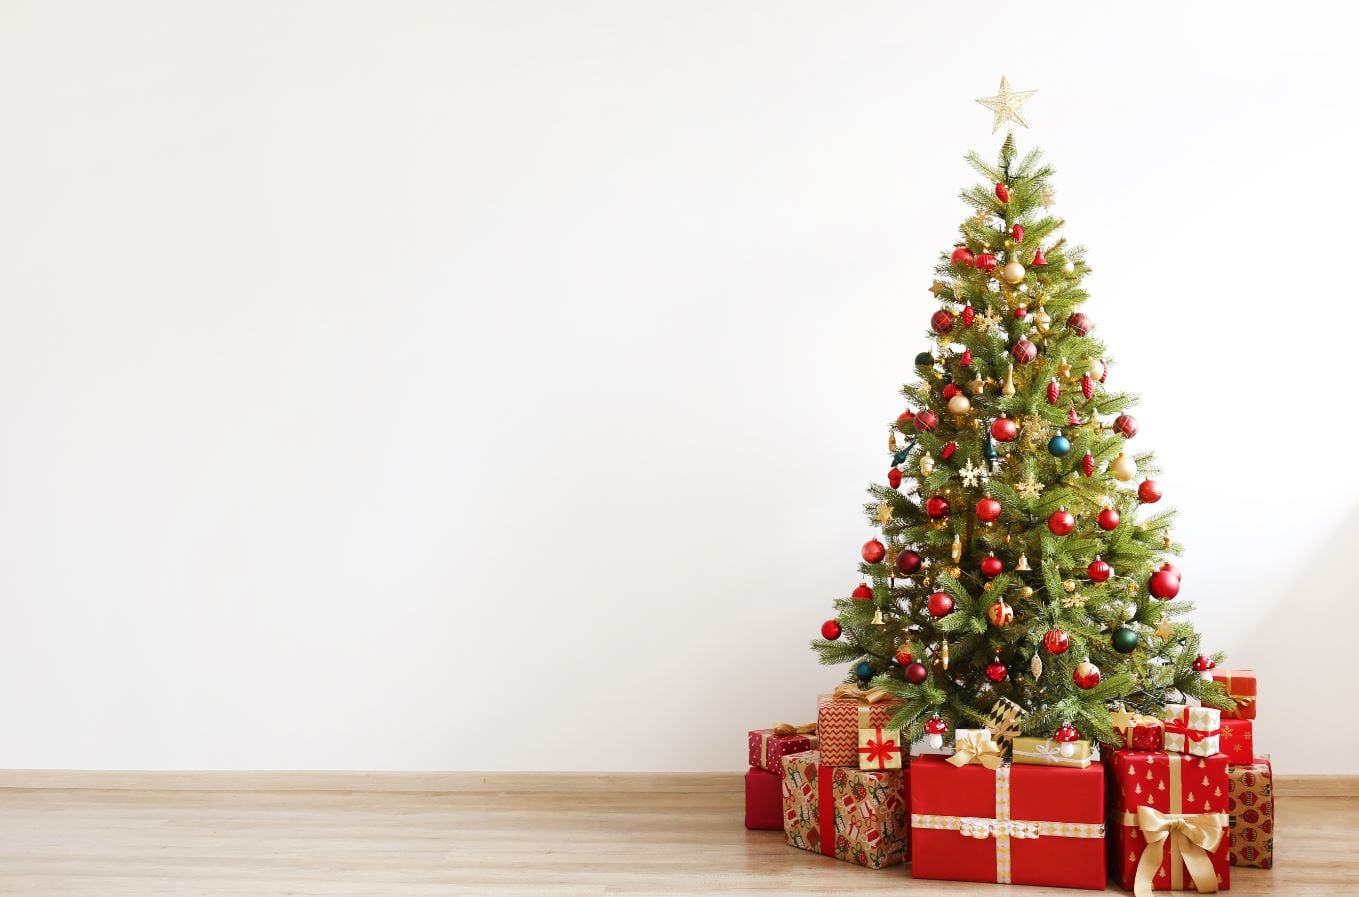 Christmas tree in a white room, with red presents sitting underneath